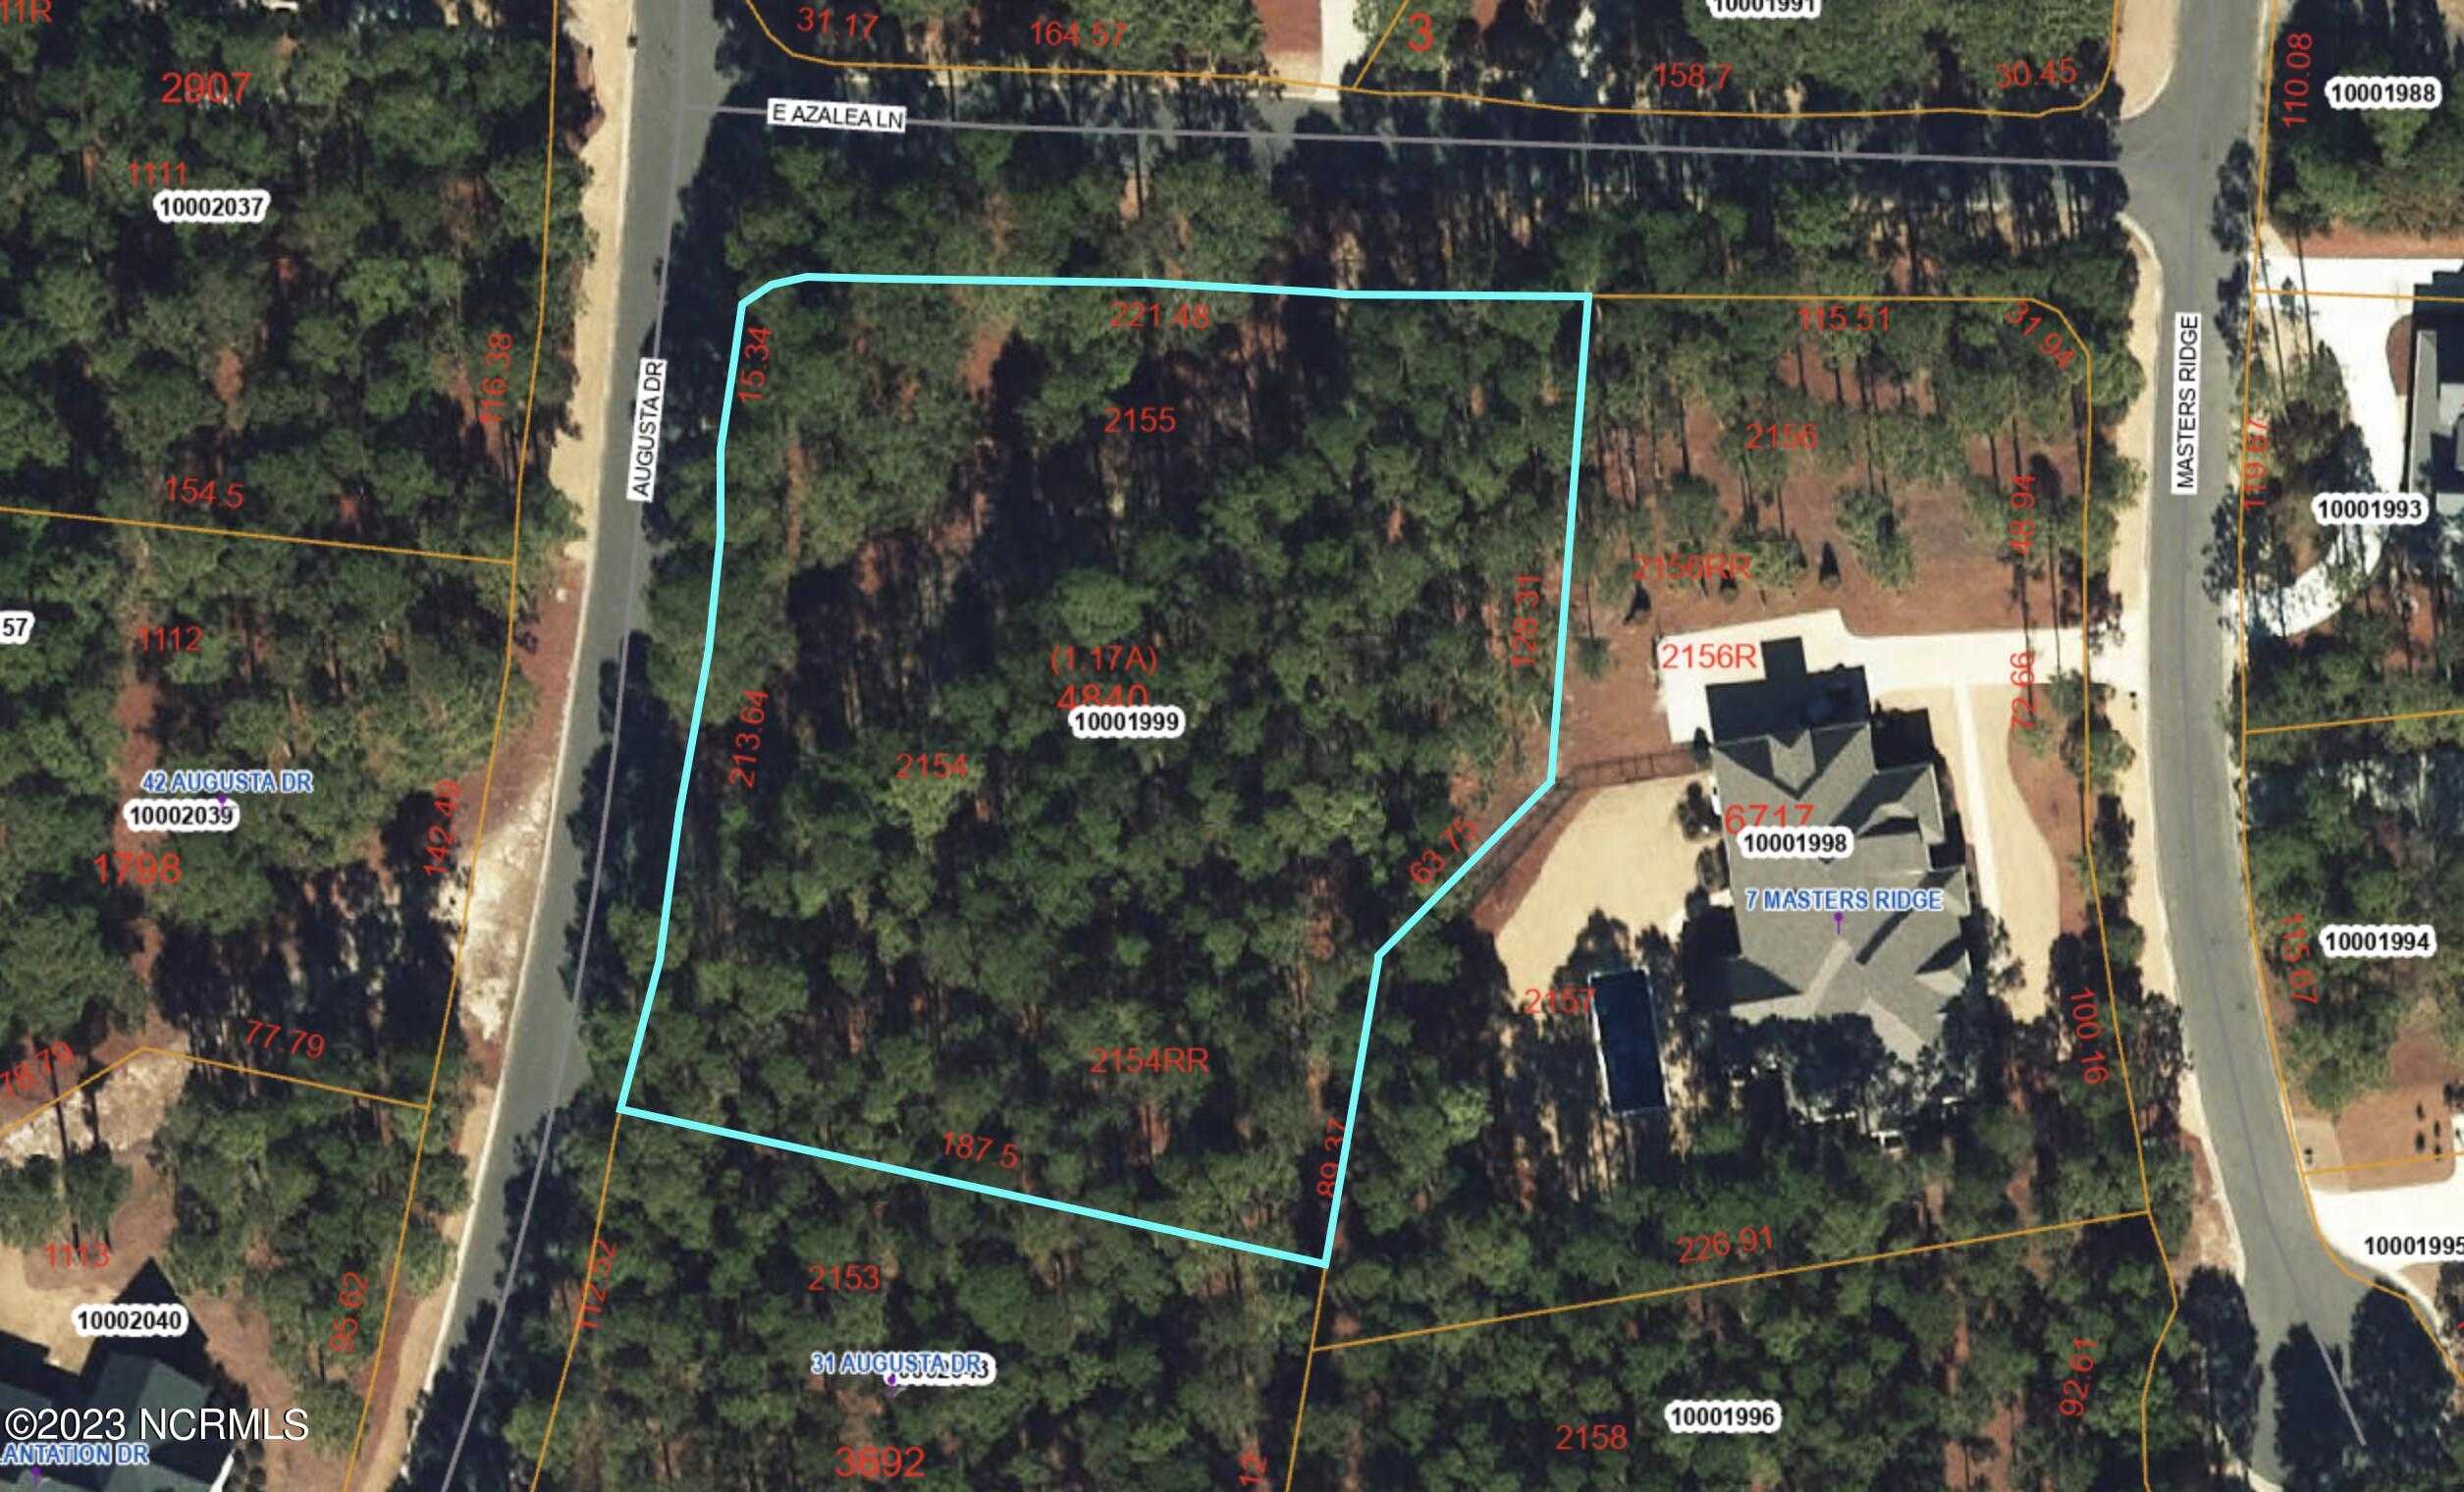 View Southern Pines, NC 28387 land